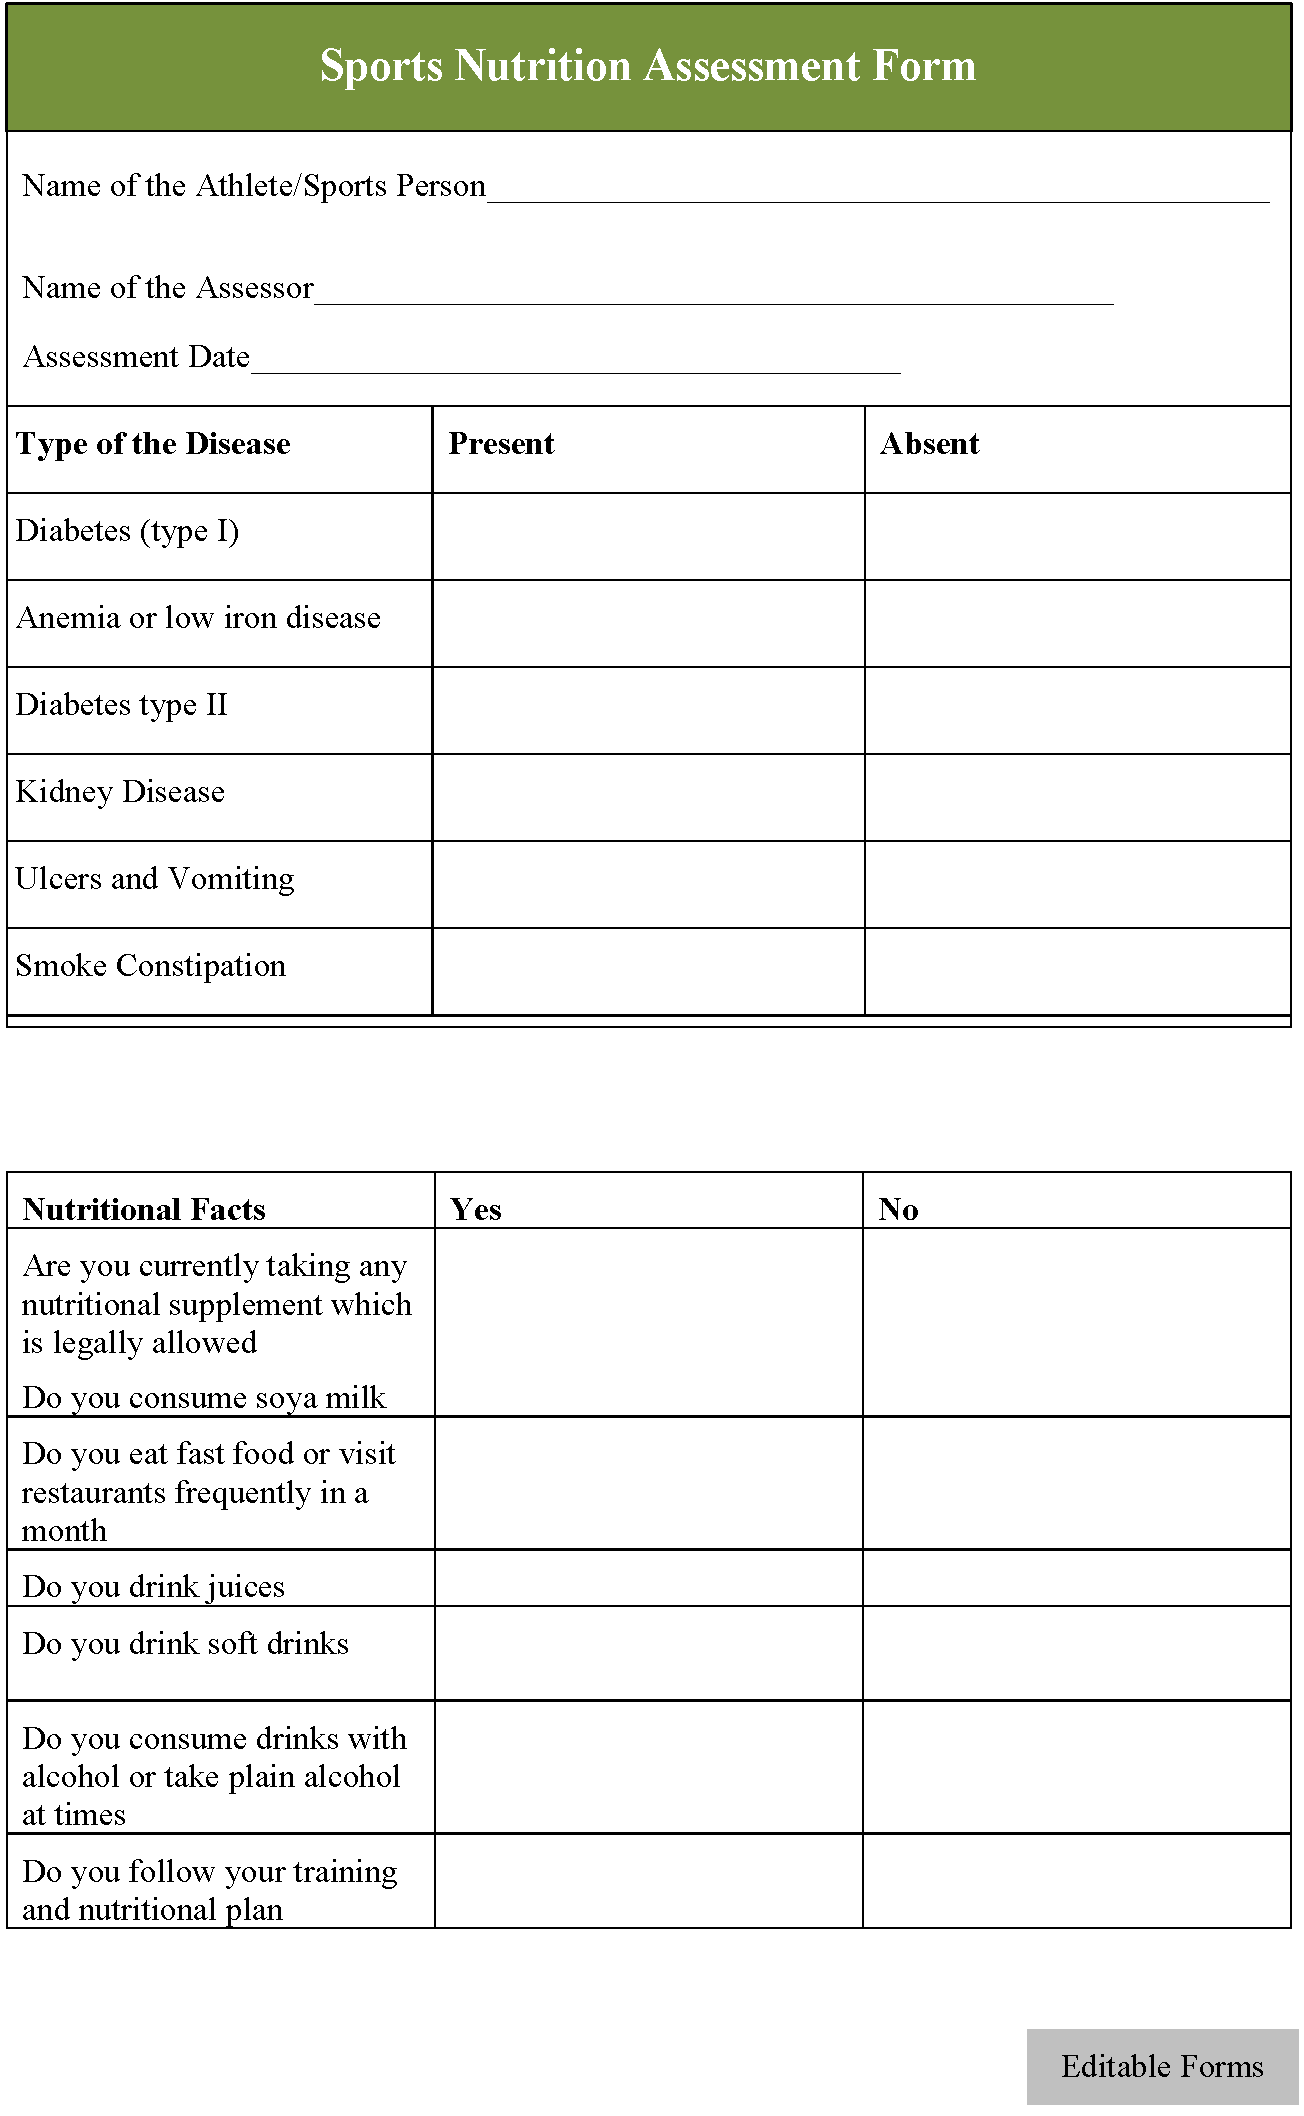 Sports Nutrition Assessment Form